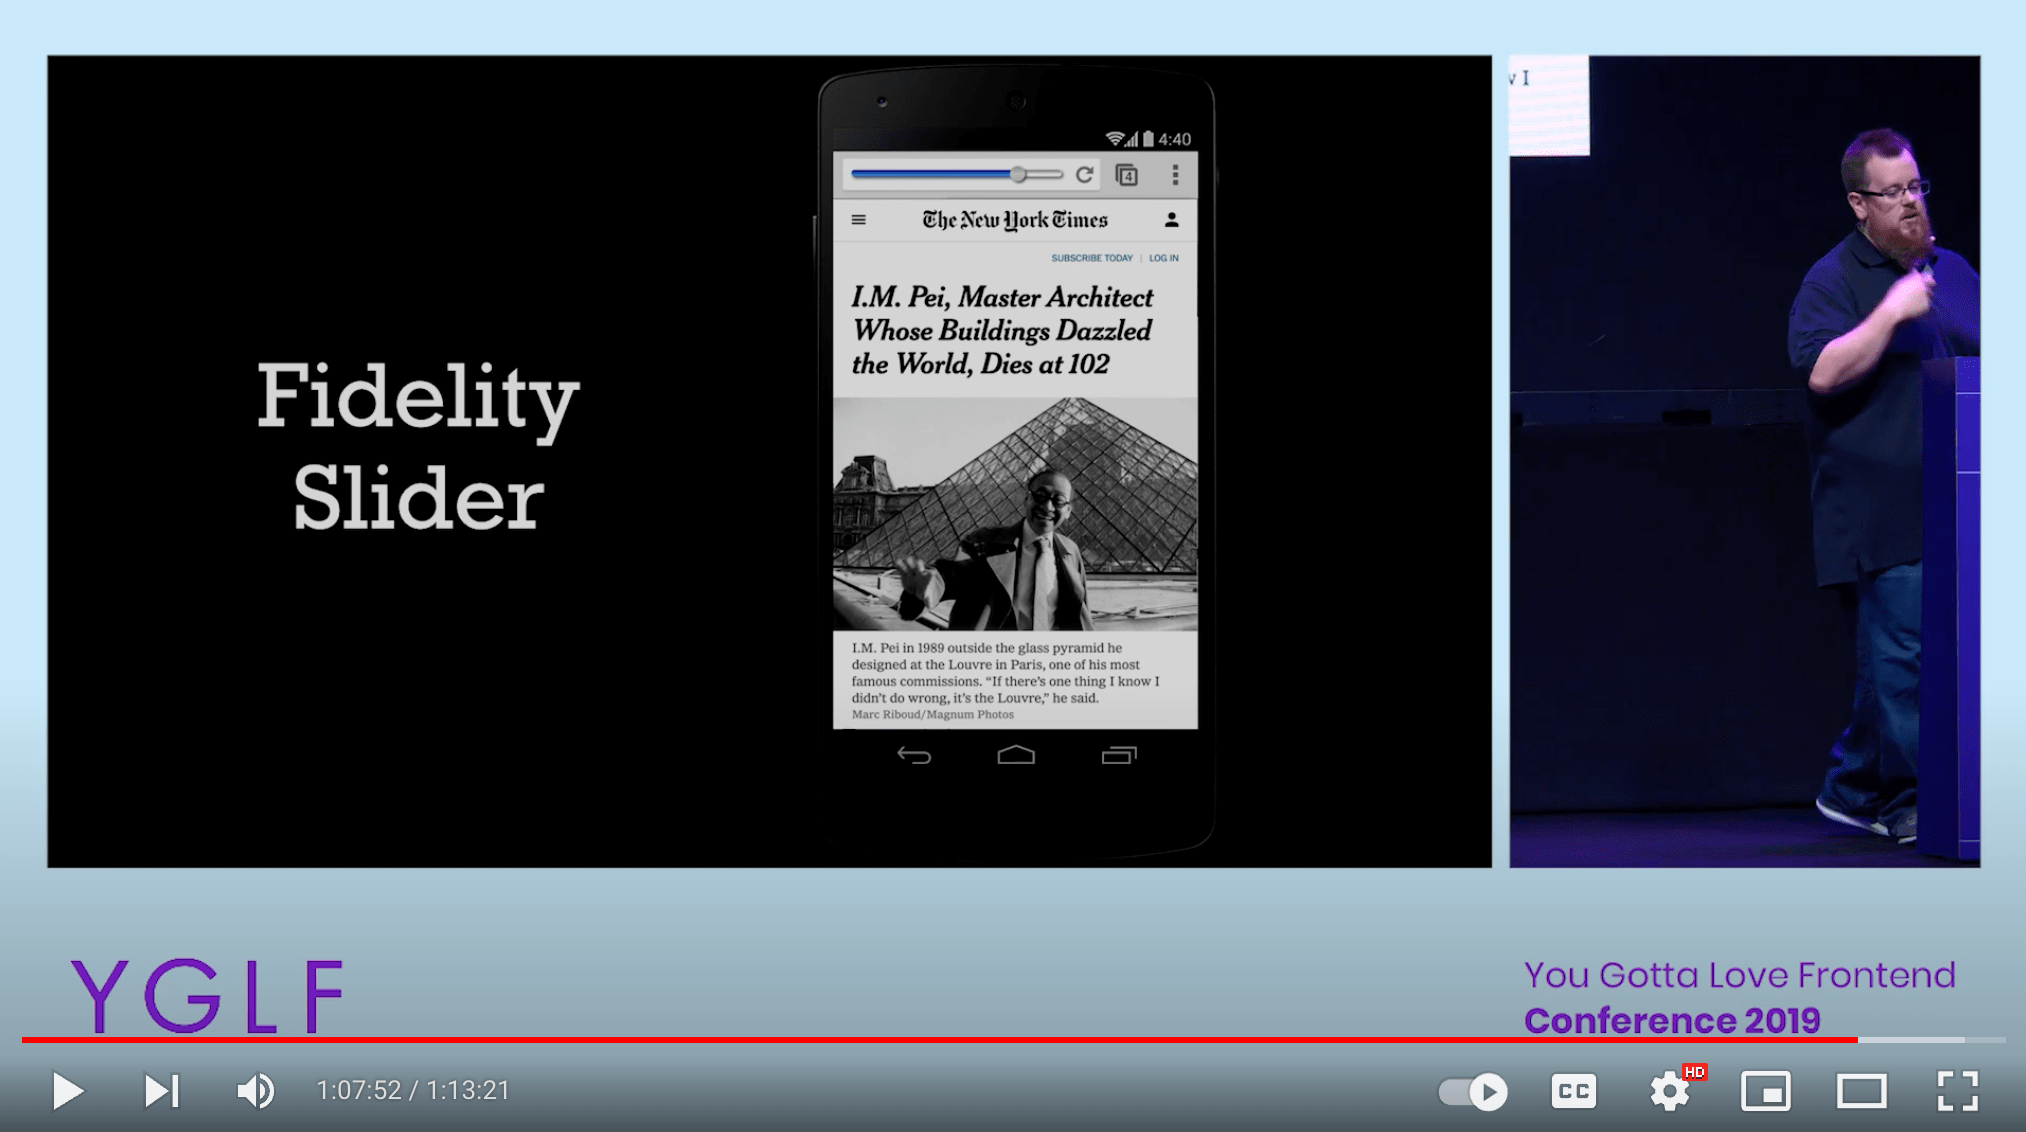 Screenshot from the YGLF conference recording showing Kyle Simpson on stage with a slide showing a proof of concept “fidelity slider” for New York Times’ website.